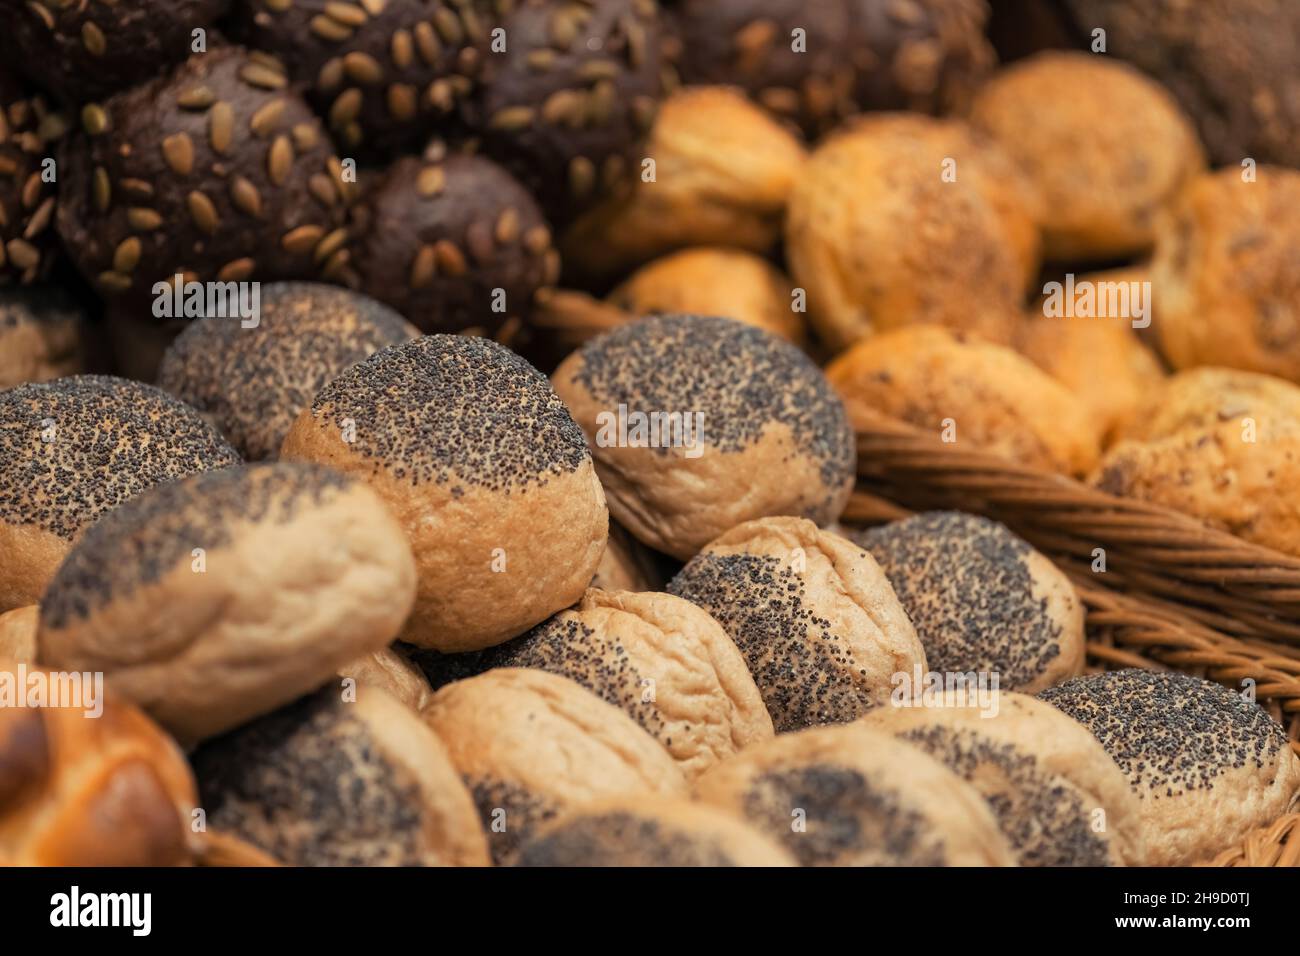 Close-up photo of breakfast lines of  rye buns with sunflower seeds and white wheat buns with poppy seeds in wooden trays at the hotel restaurant. Stock Photo